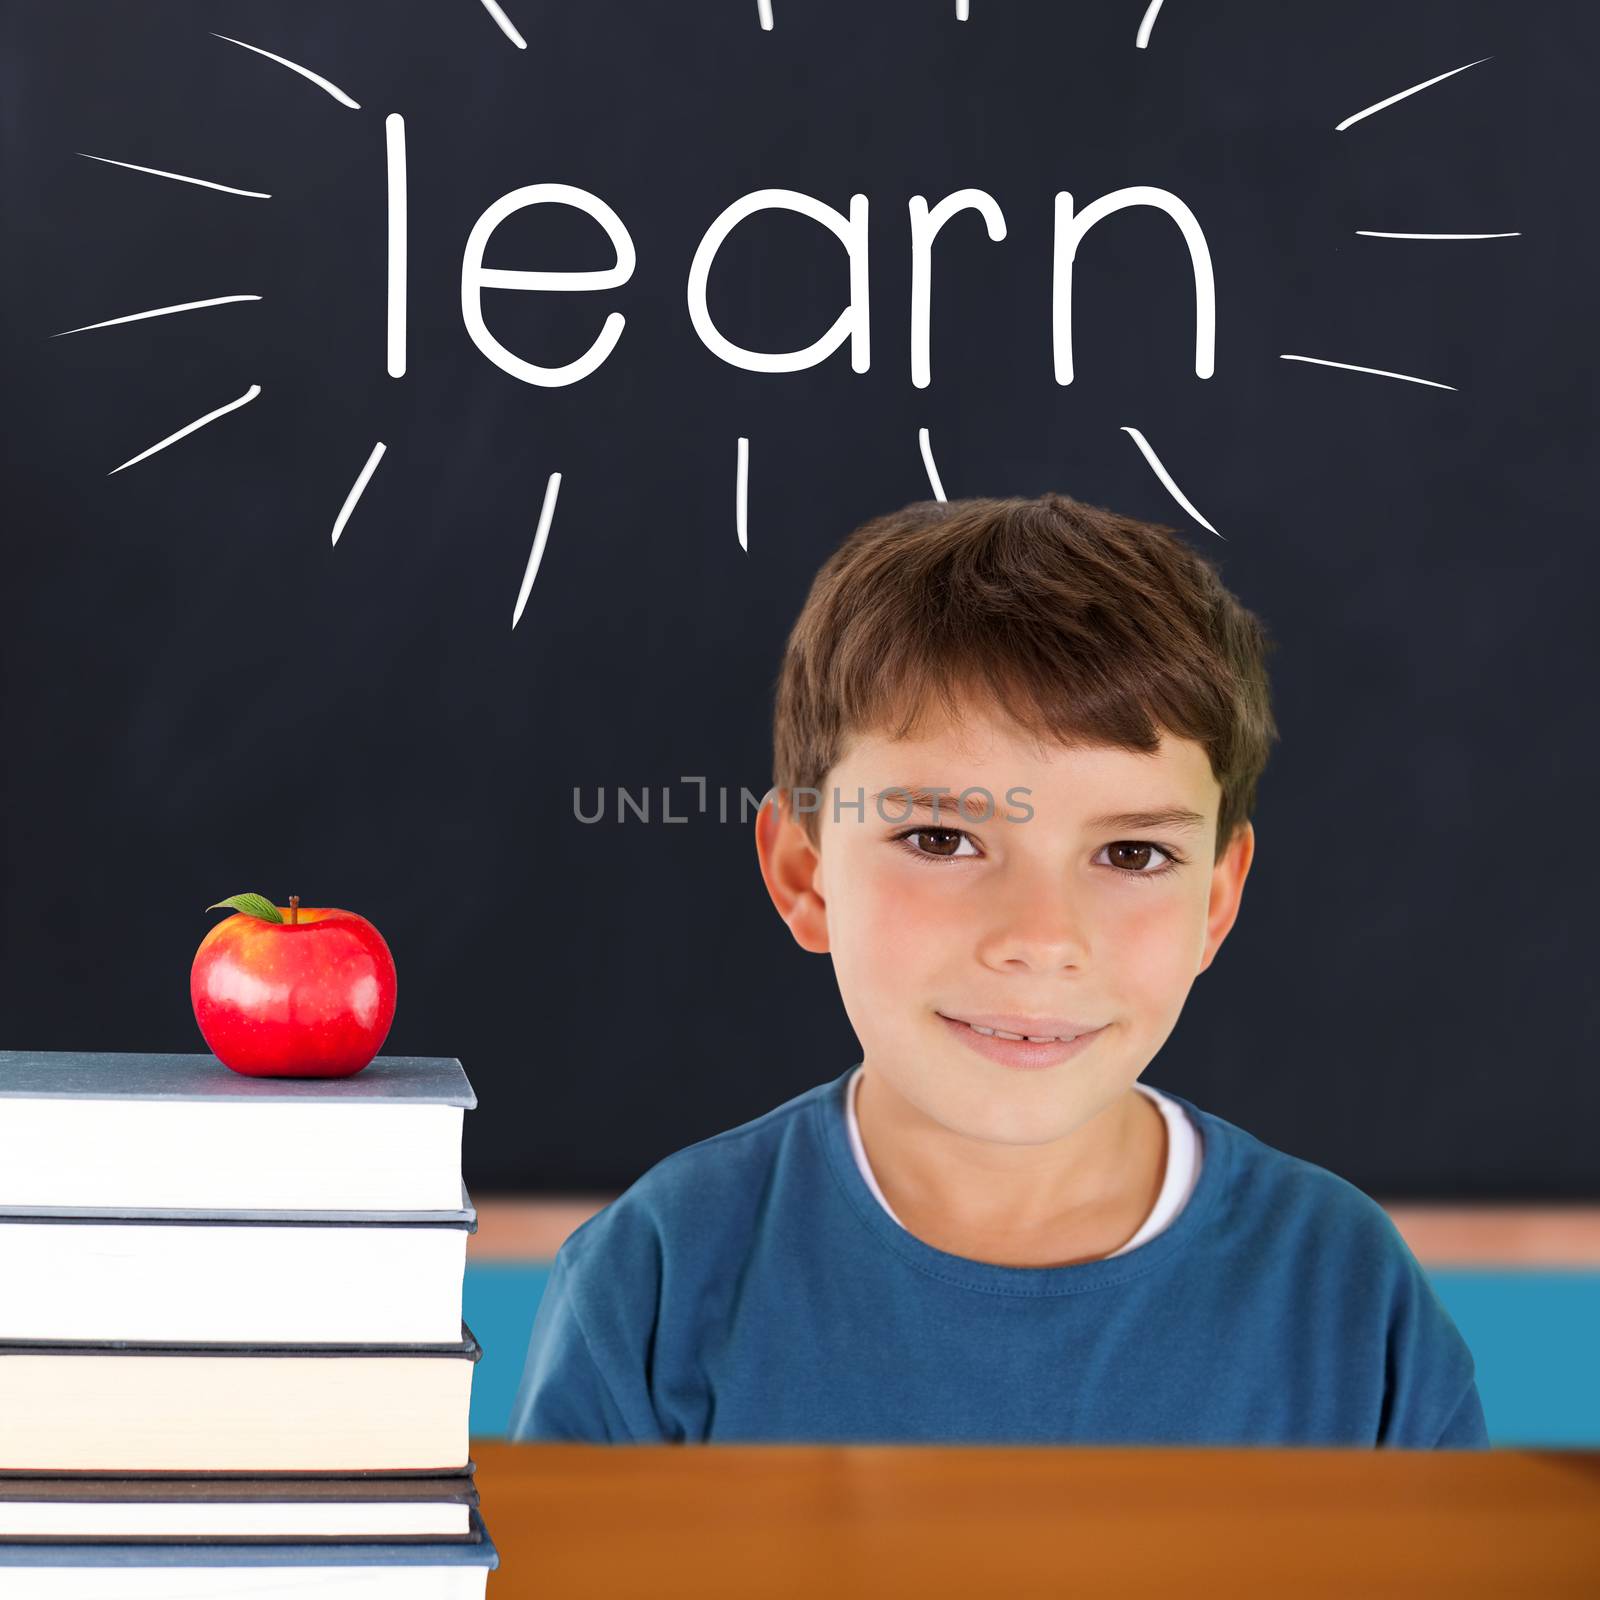 The word learn and cute boy smiling against red apple on pile of books in classroom